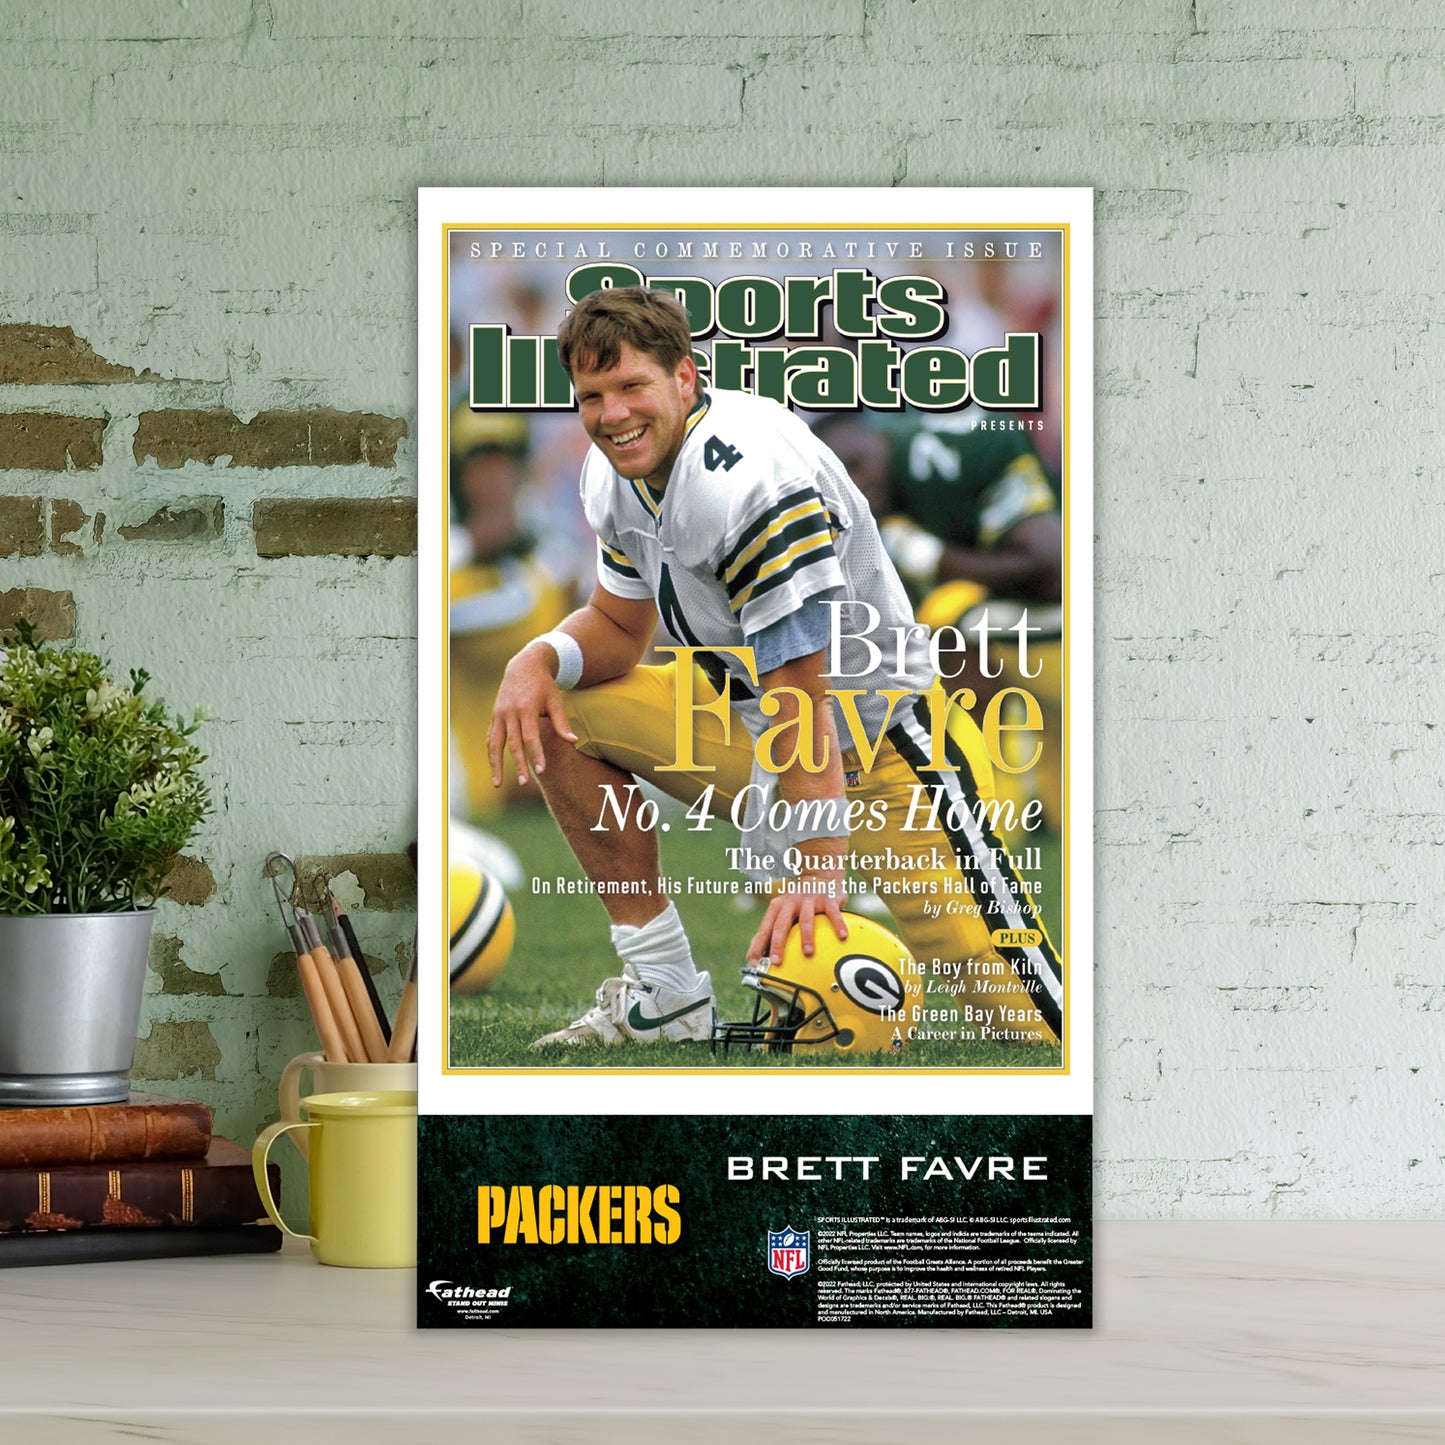 Green Bay Packers: Brett Favre July 2015 Commemorative Sports Illustrated Cover  Mini   Cardstock Cutout  - Officially Licensed NFL    Stand Out